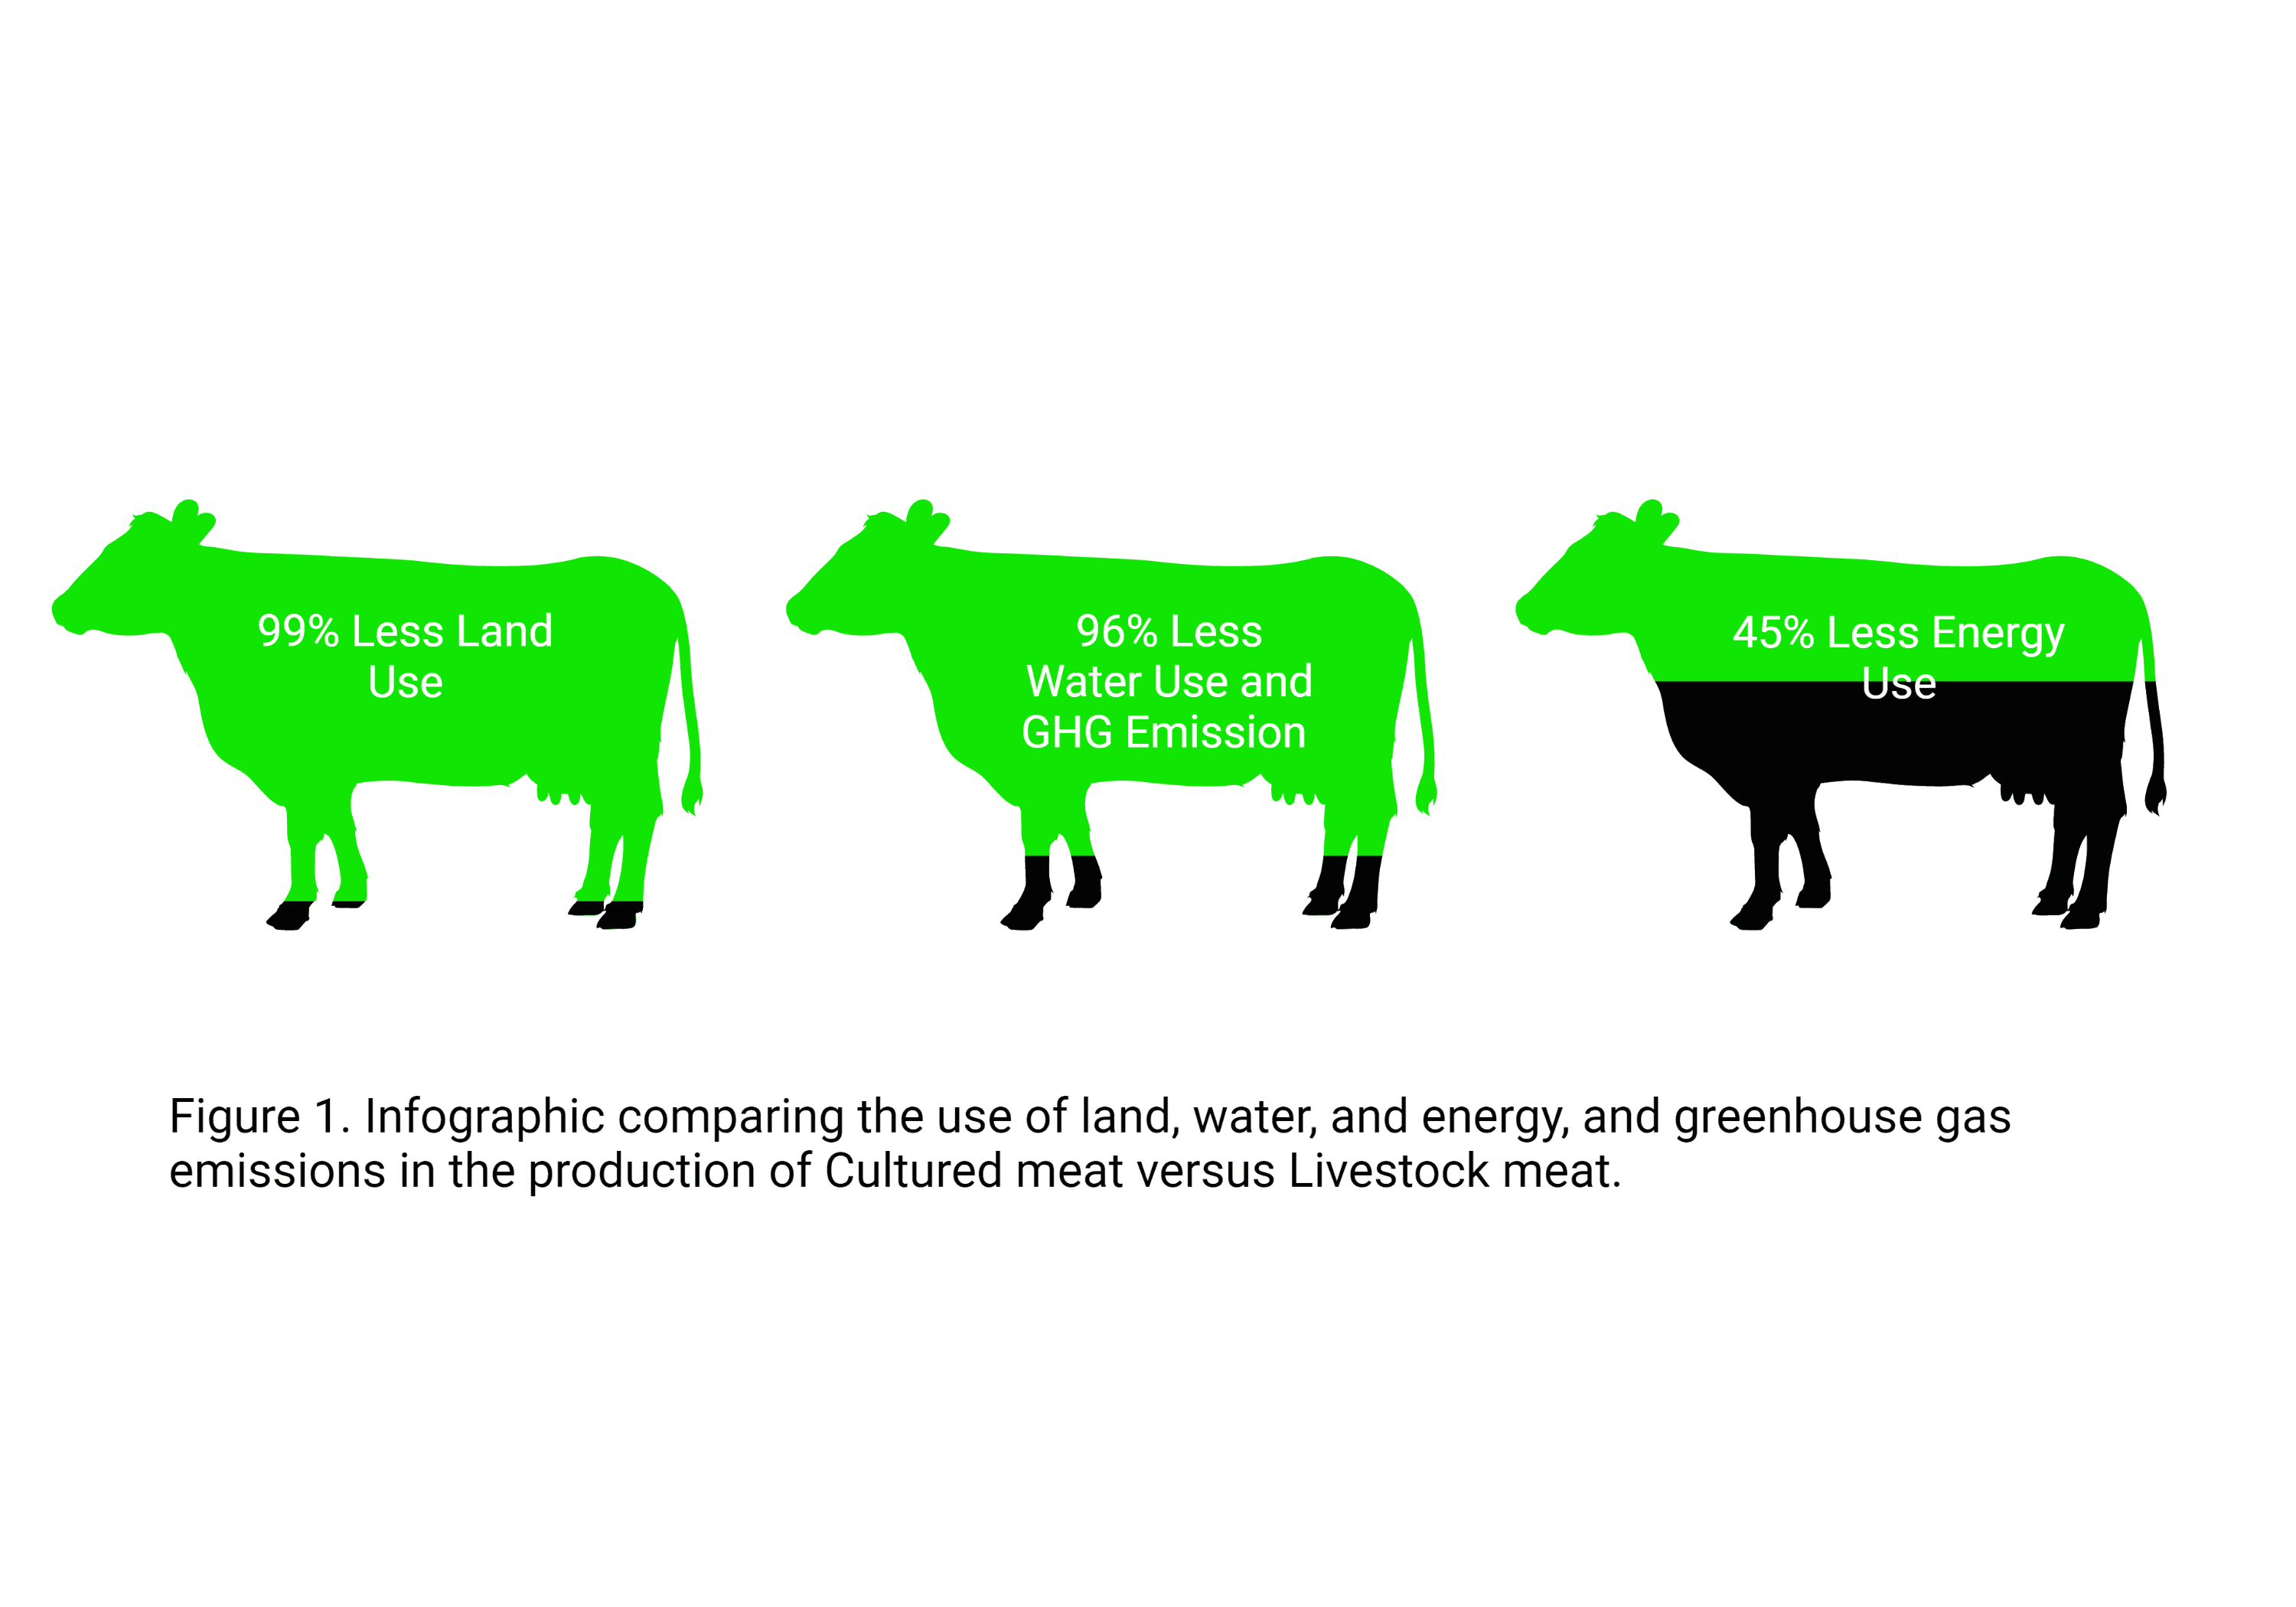 Figure 1. Infographic comparing the use of land, water and energy, and greenhouse gas emissions in the production of Cultured meat versus Livestock meat